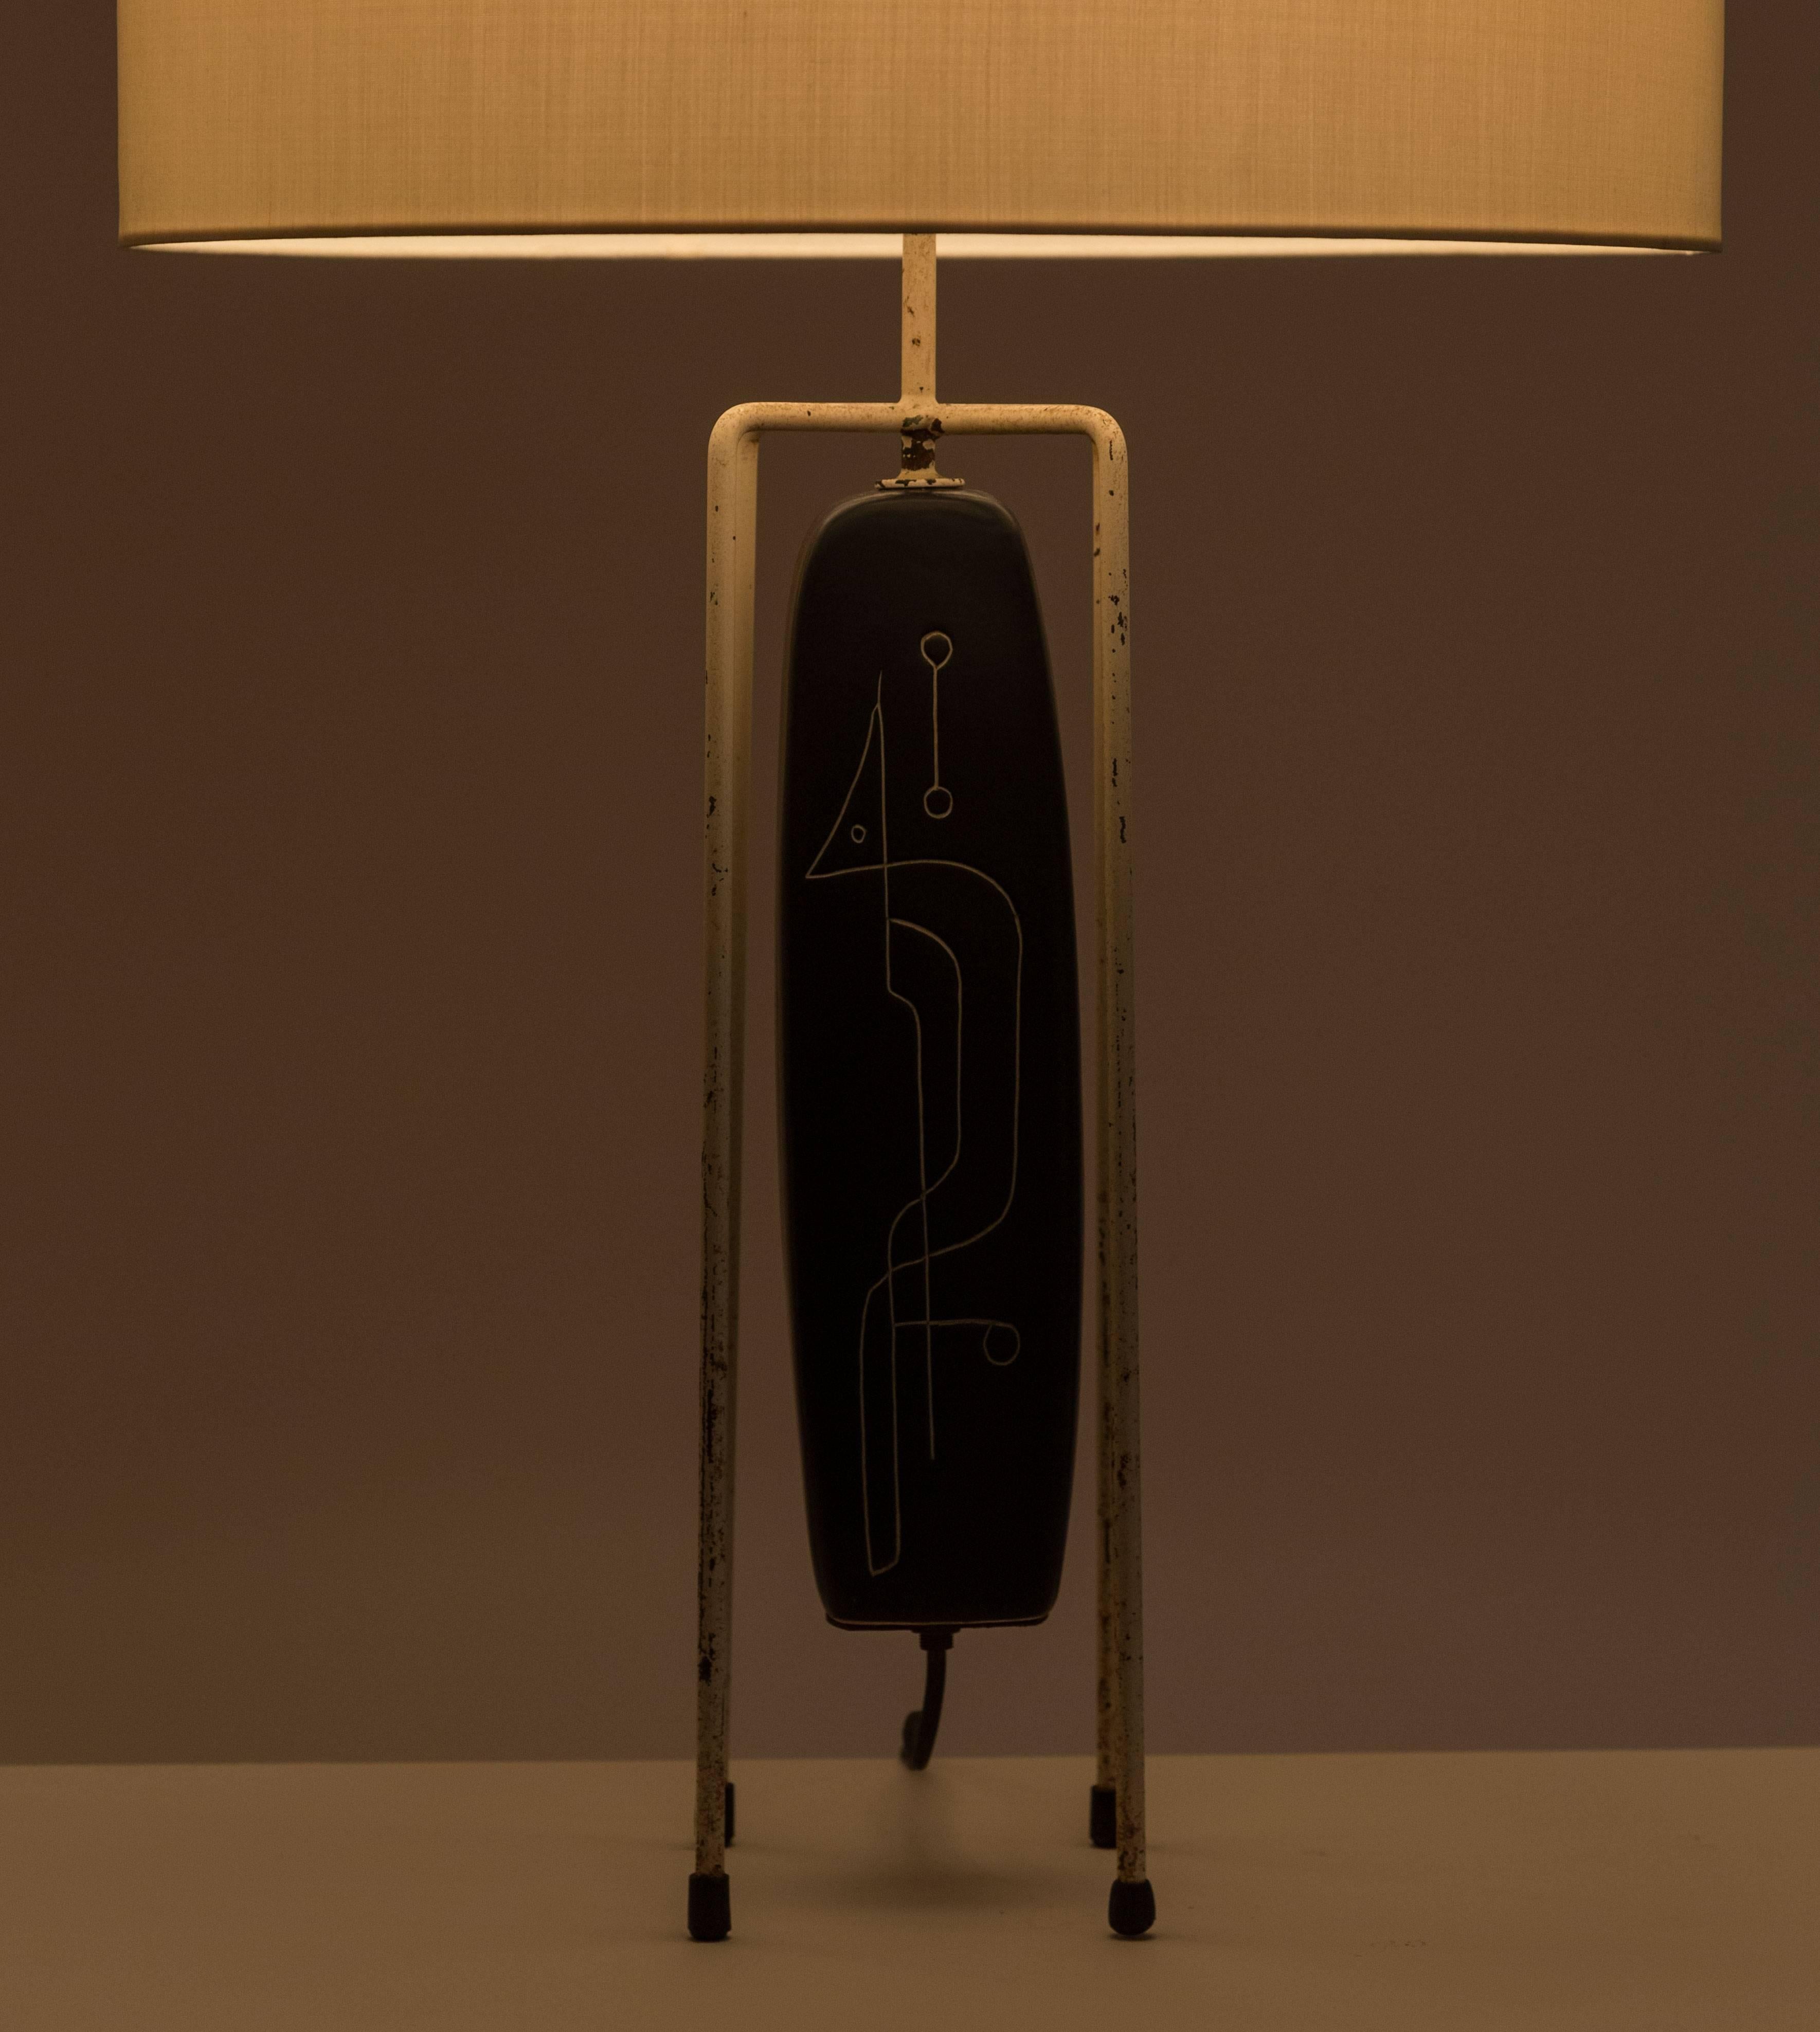 American iron and cast porcelain table lamp. Abstract design hand-carved on to the porcelain base. Original cord. E26 75w maximum bulb. Shade not included but can be custom fabricated. Contact us for details.